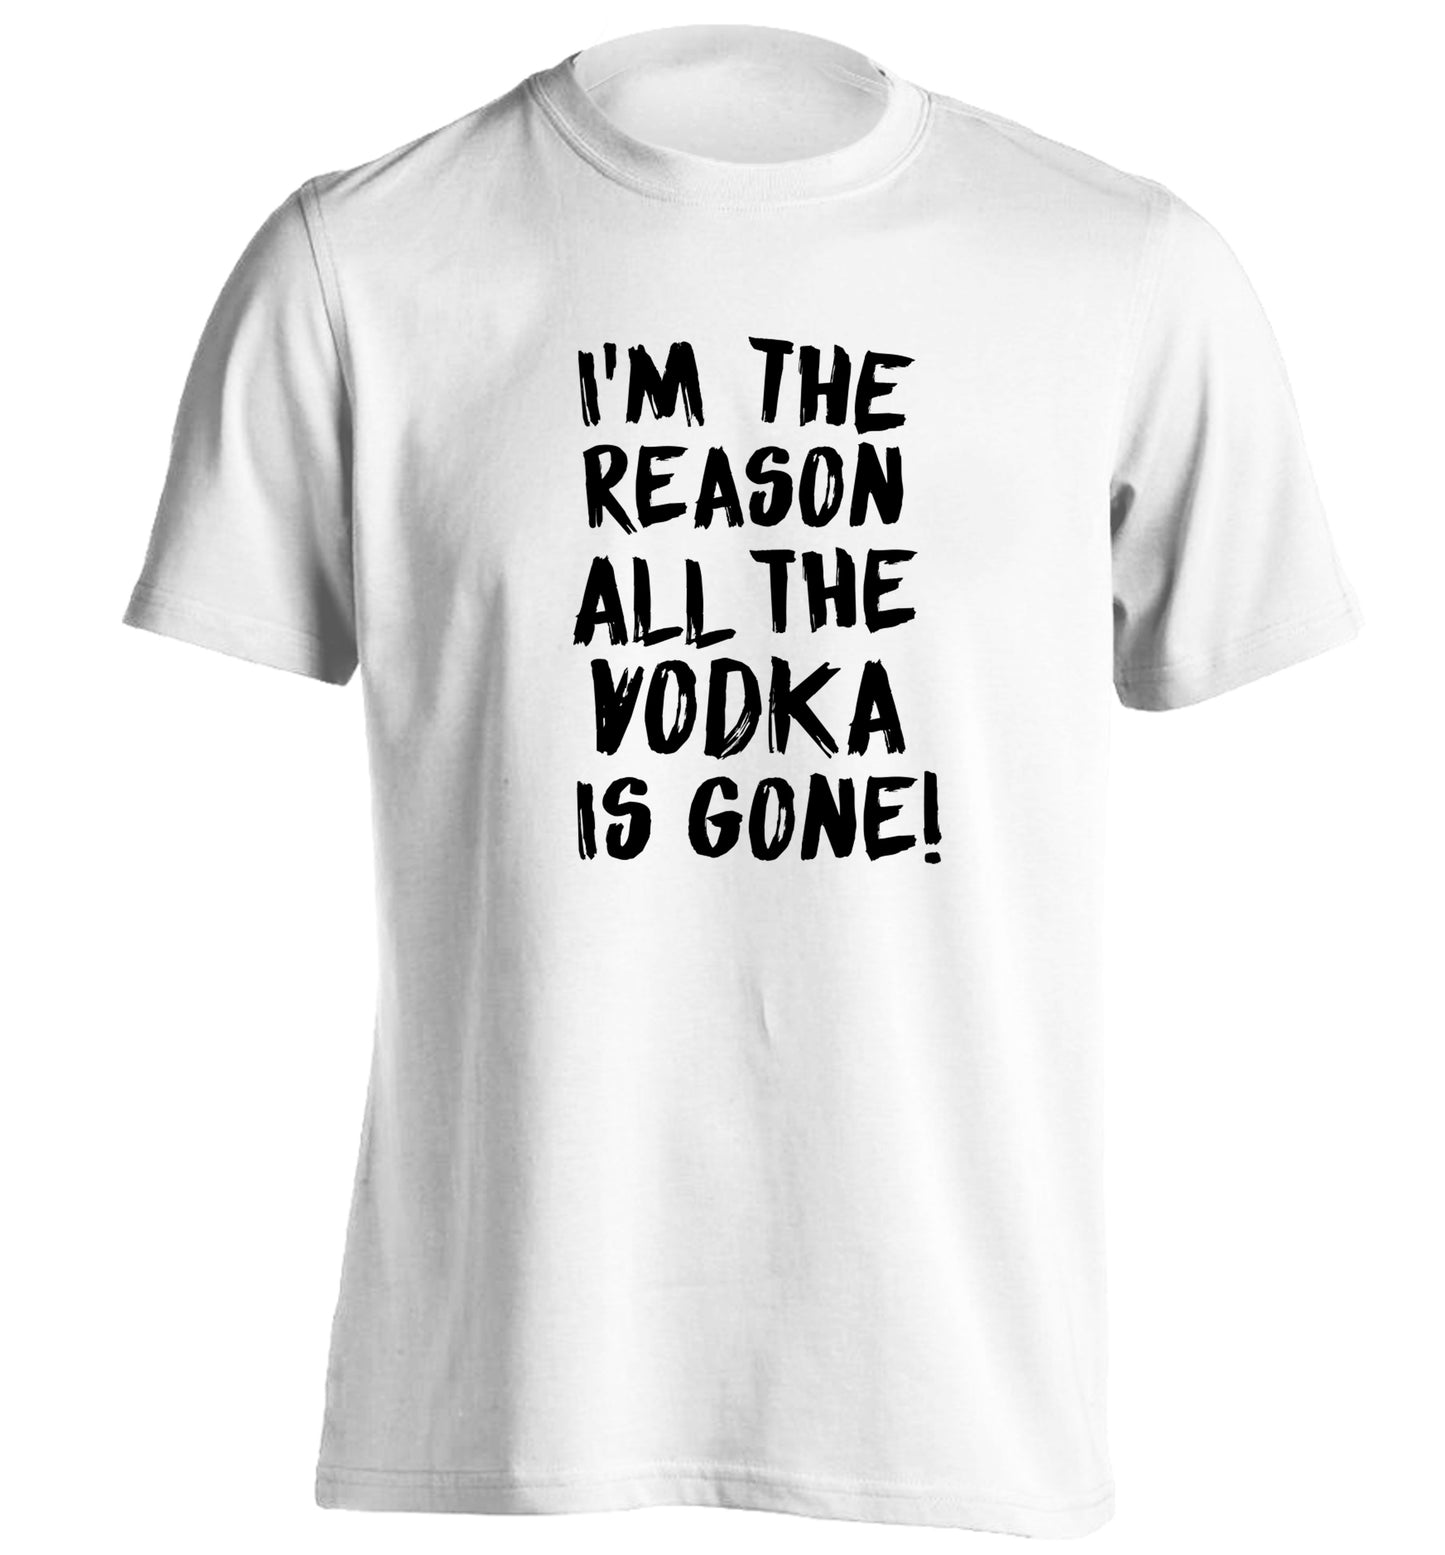 I'm the reason all the tequila is gone adults unisex white Tshirt 2XL